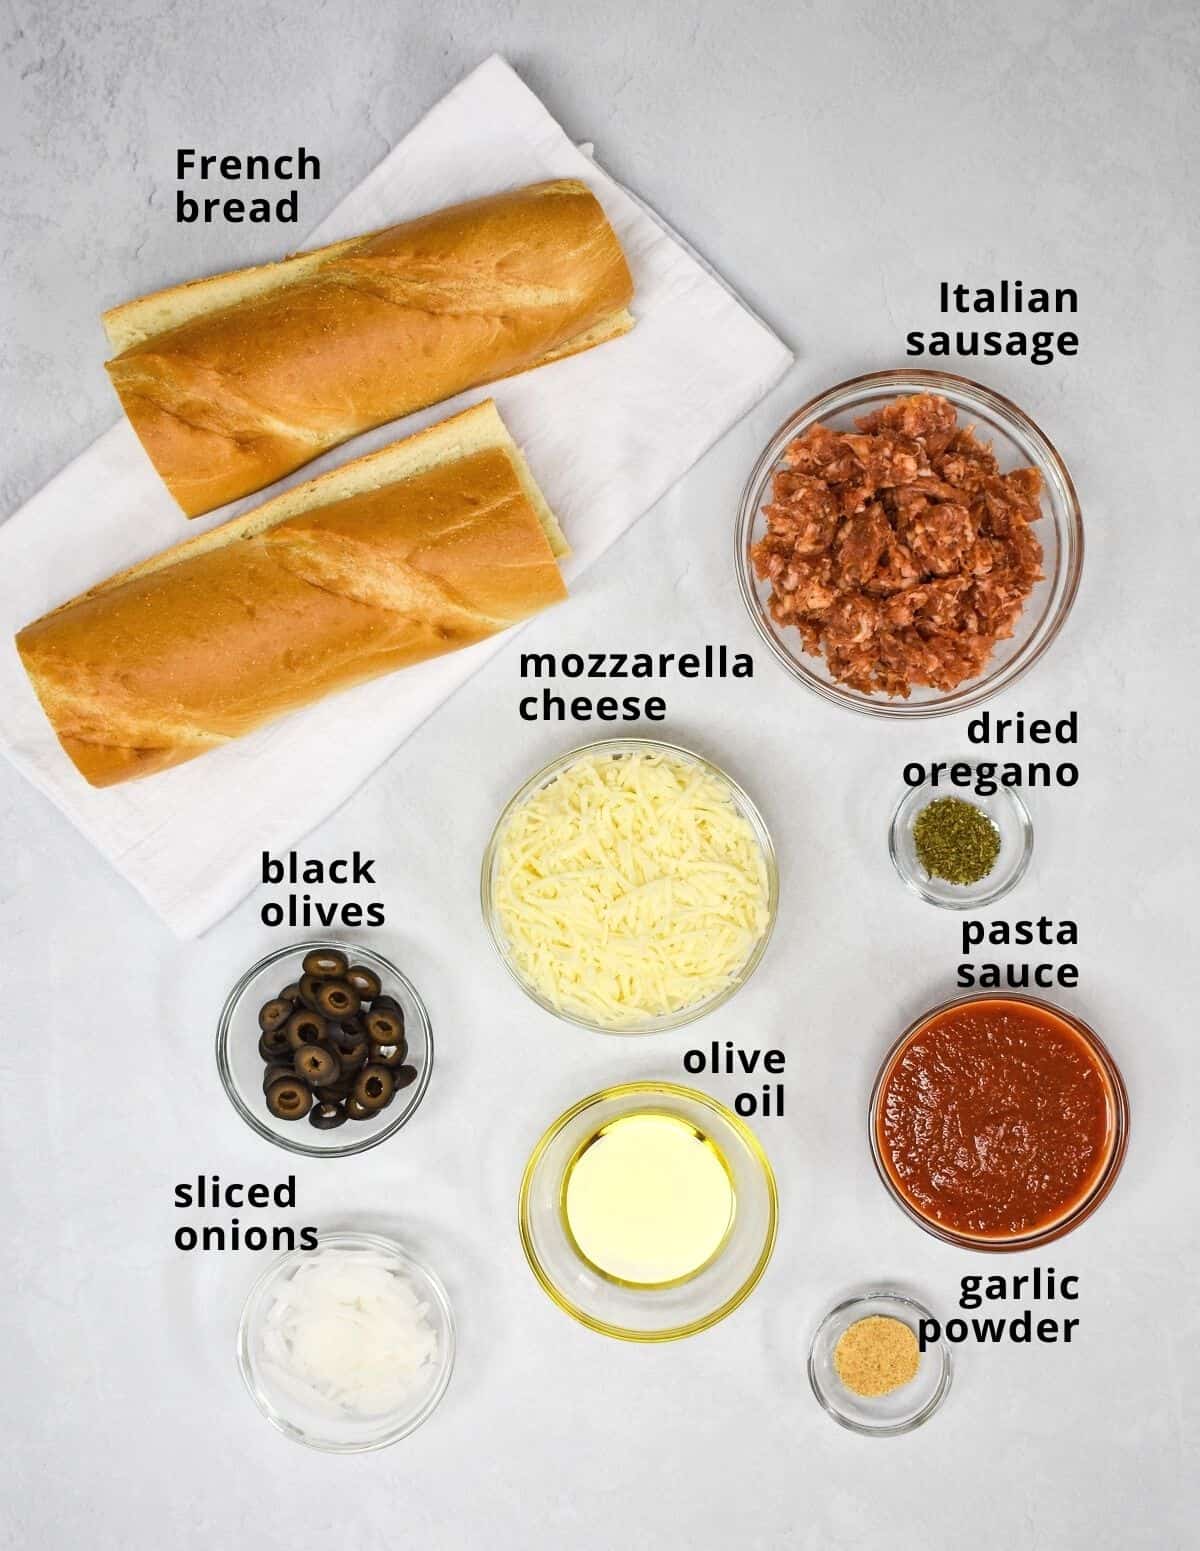 The ingredients for the pizza arranged on a white table and labeled in small black letters.